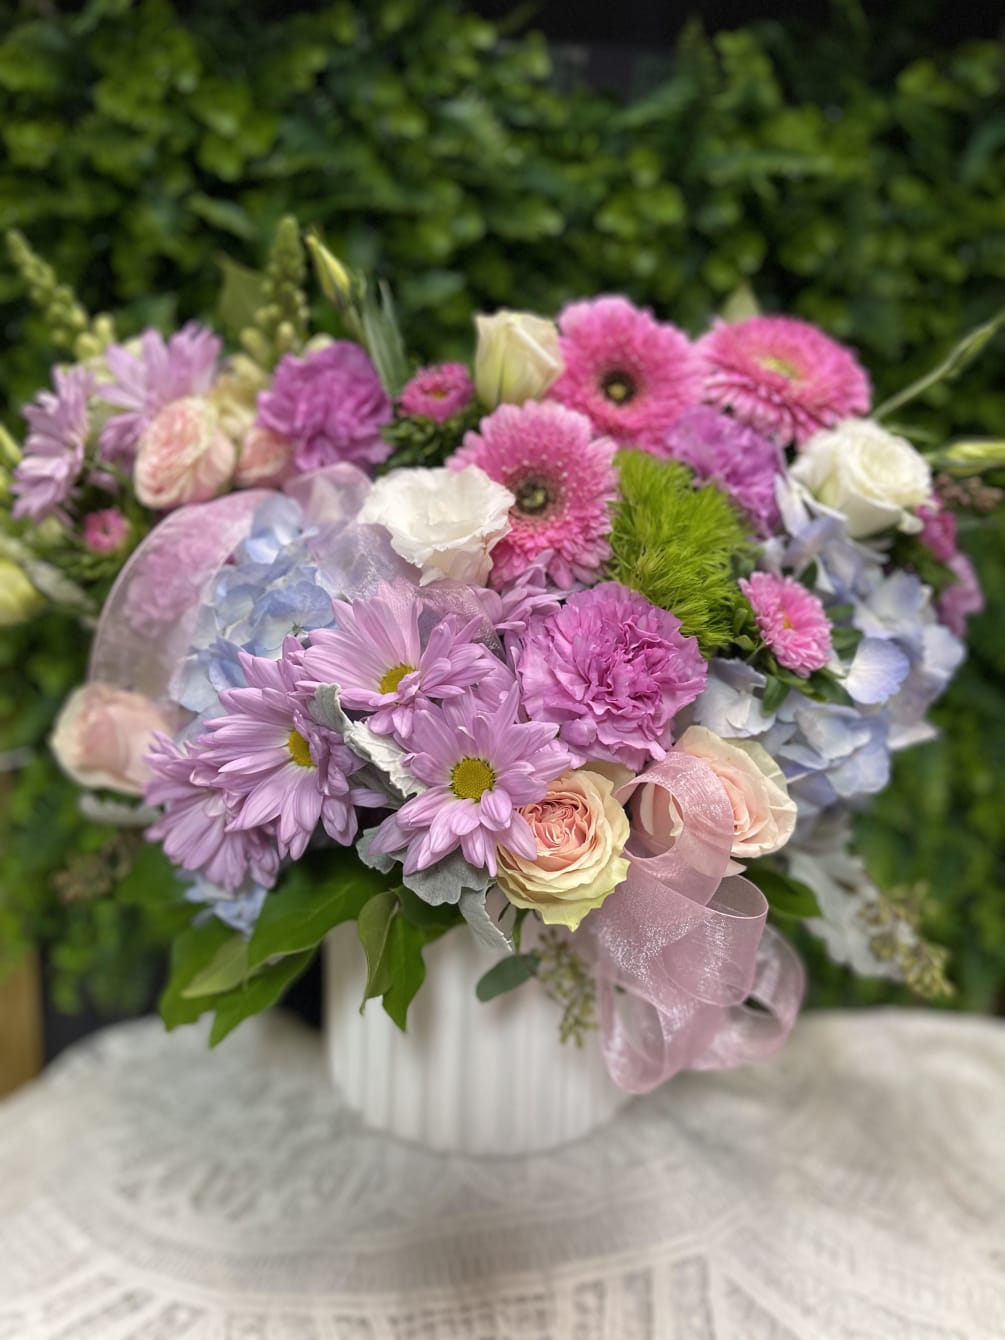 A FLOWERS ARRANGEMENT REMEMBERING THAT SWEET LOVE, WITH TOUCHES OF PASTEL COLORS.